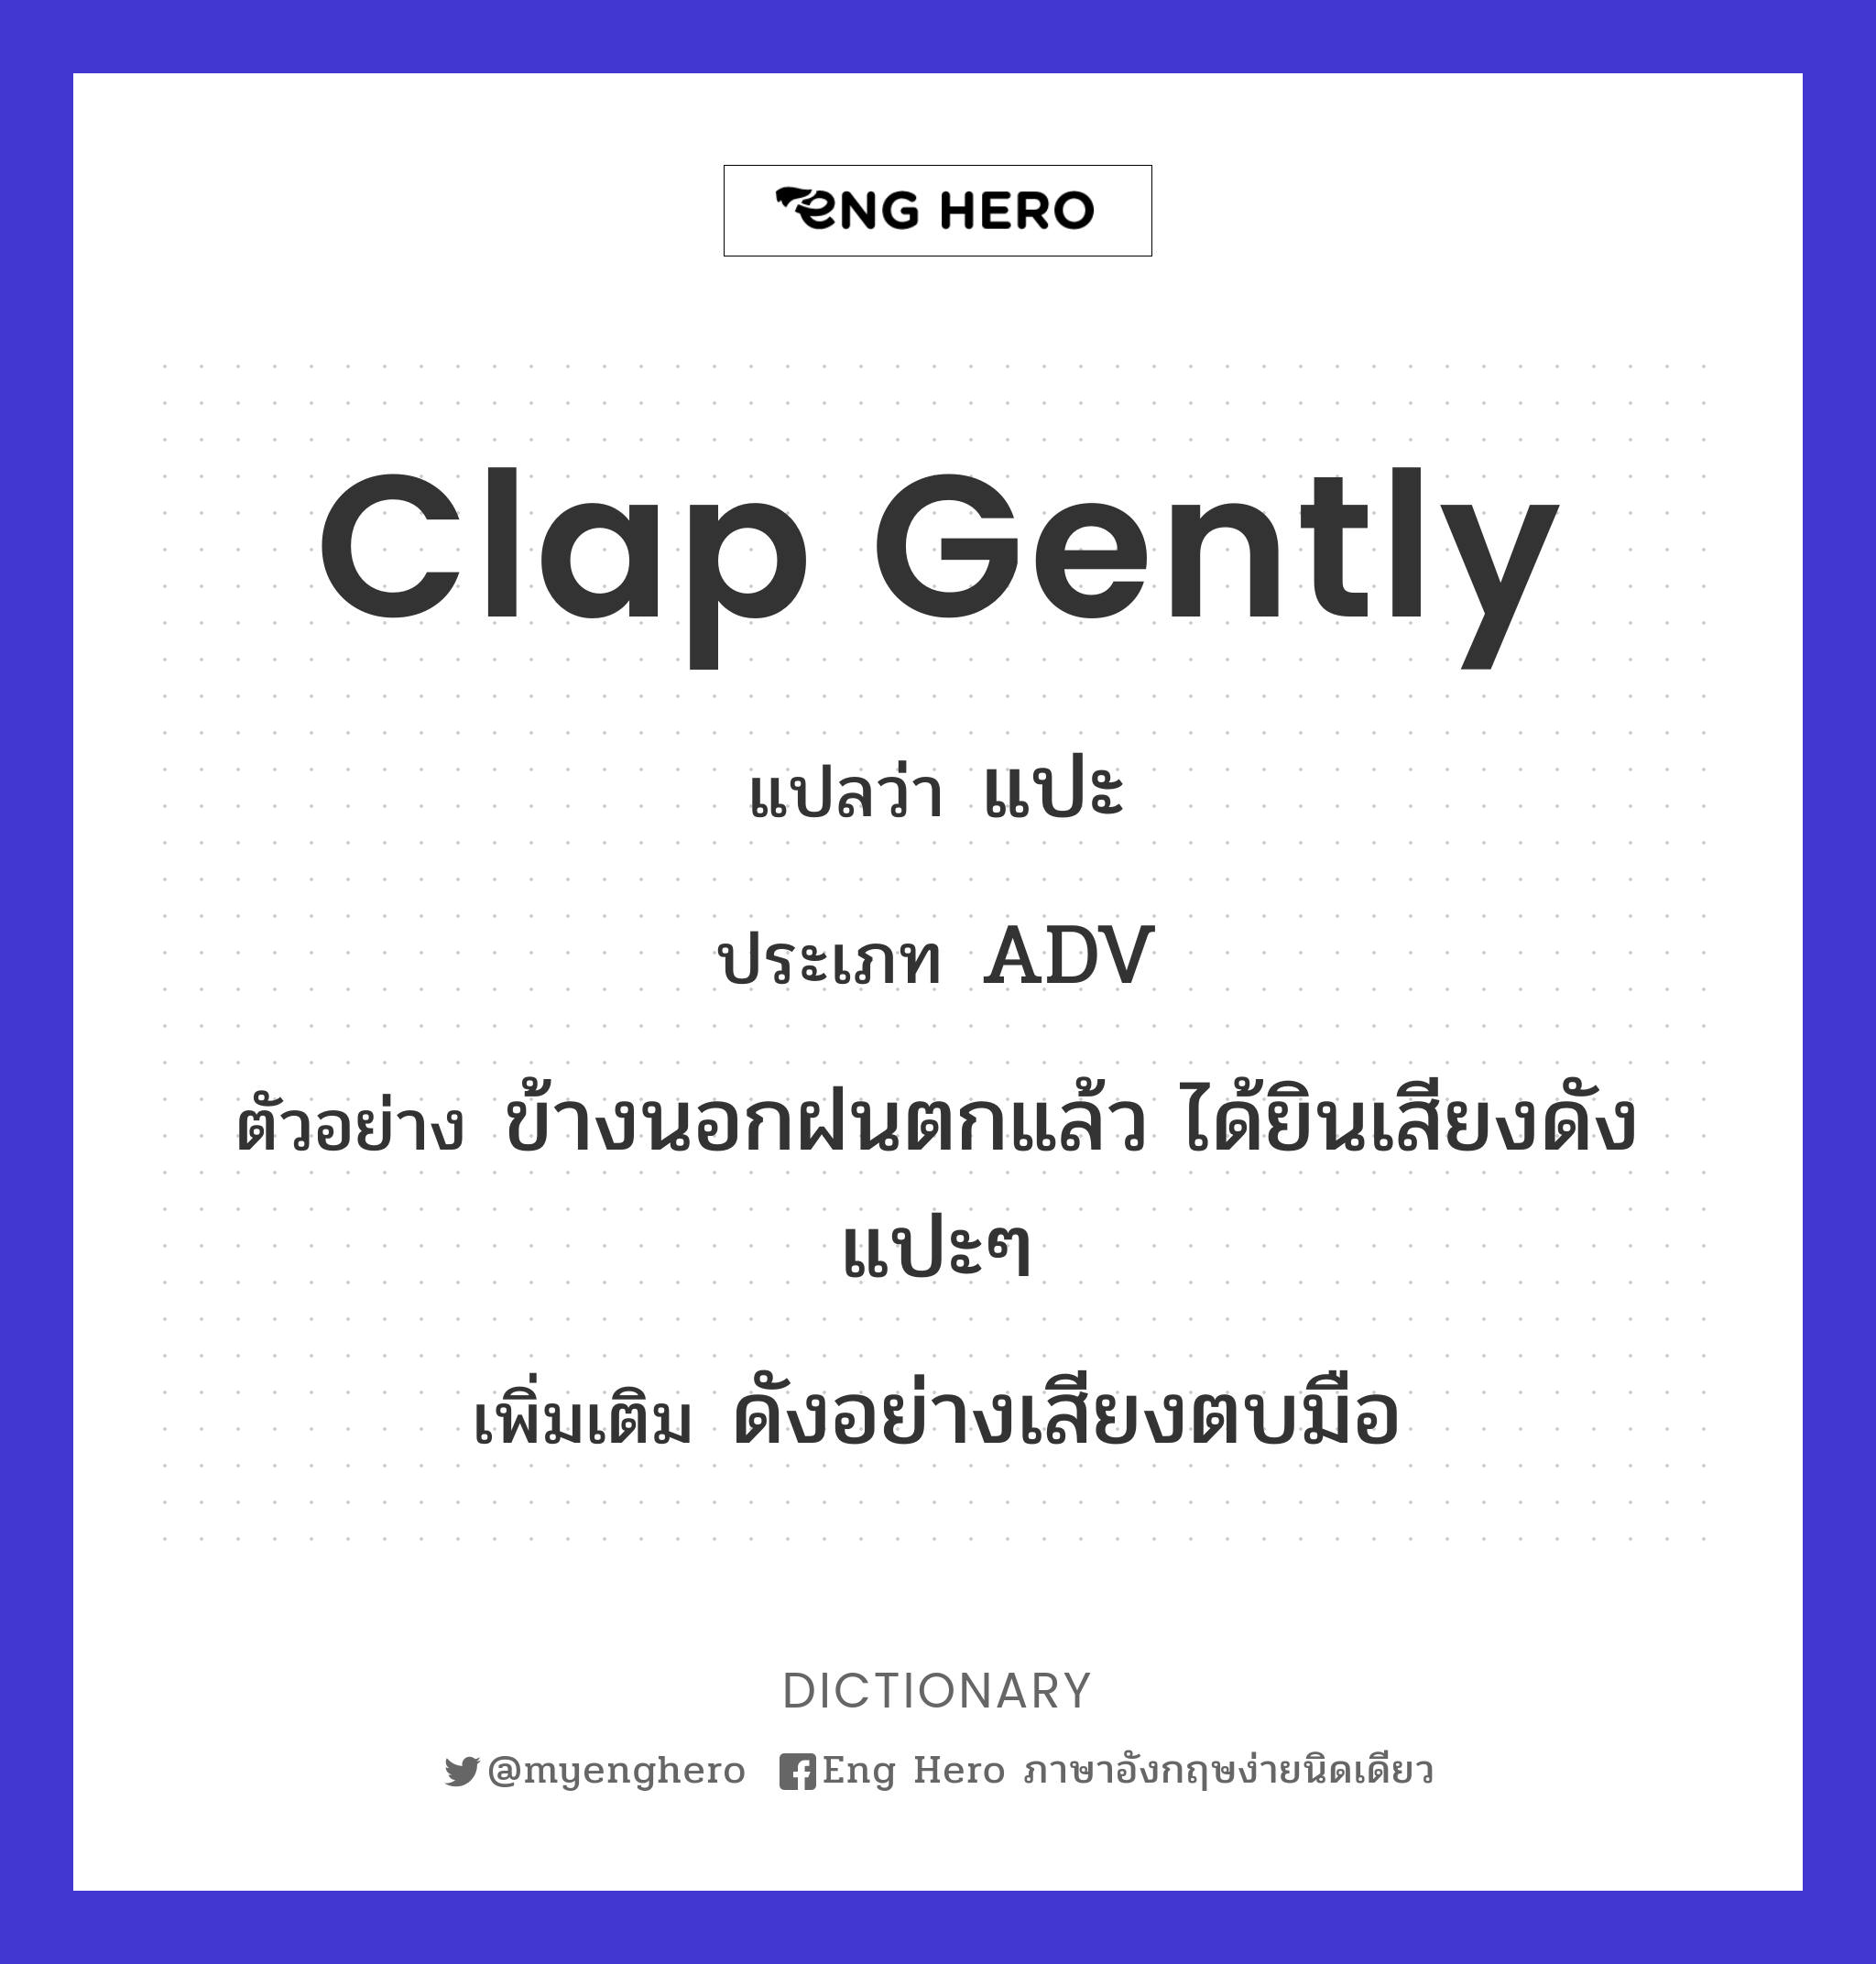 clap gently